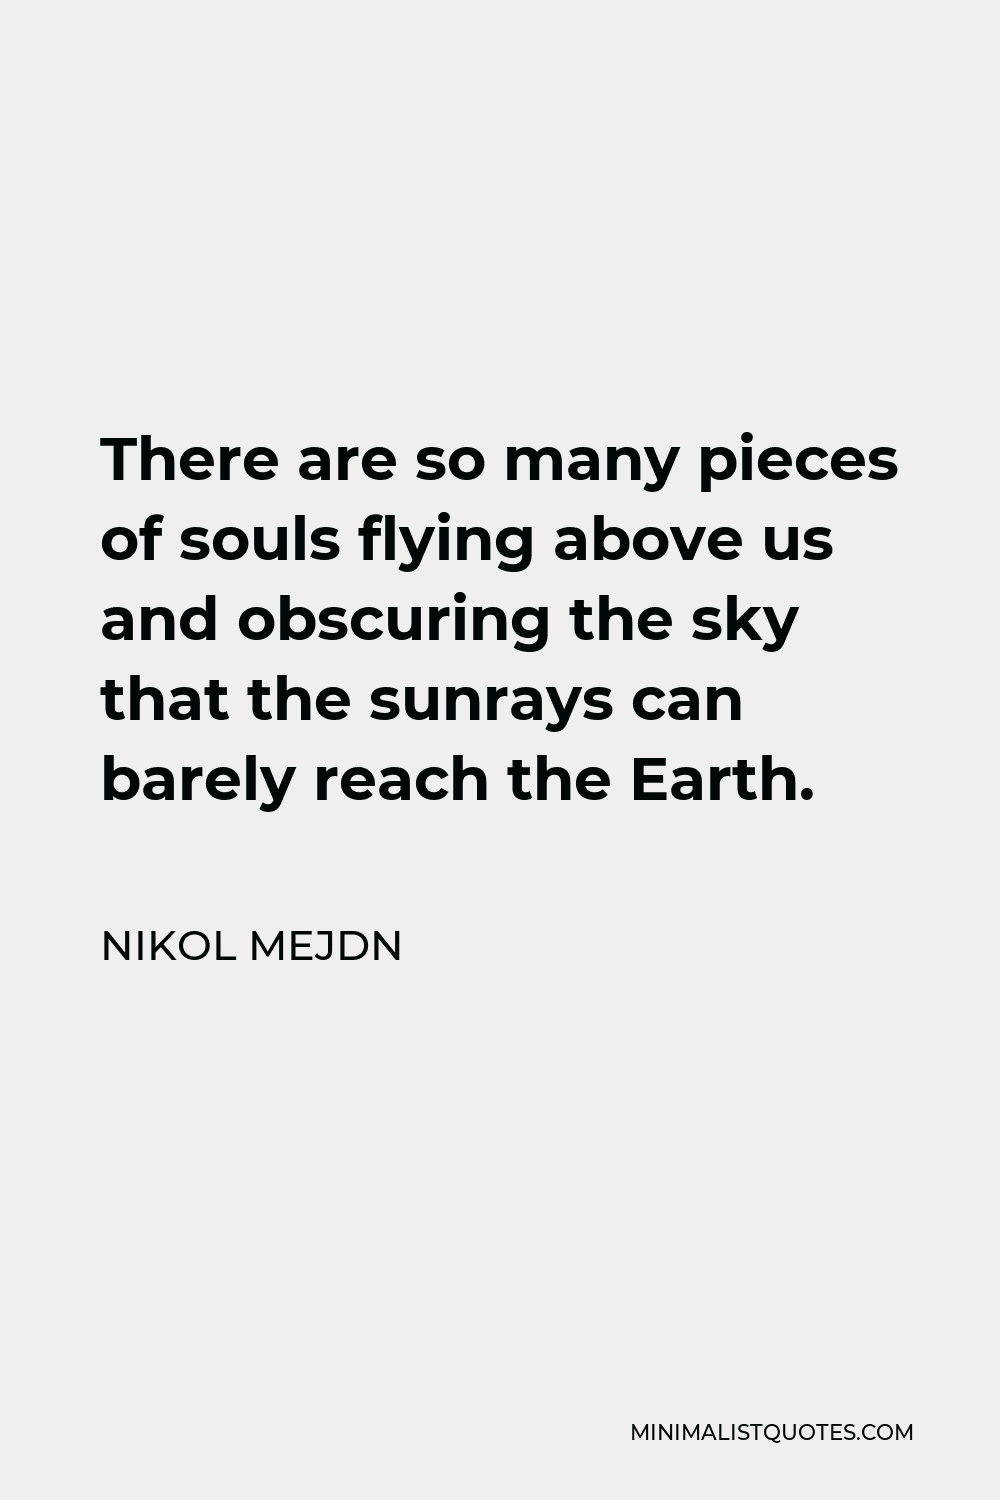 Nikol Mejdn Quote - There are so many pieces of souls flying above us and obscuring the sky that the sunrays can barely reach the Earth.